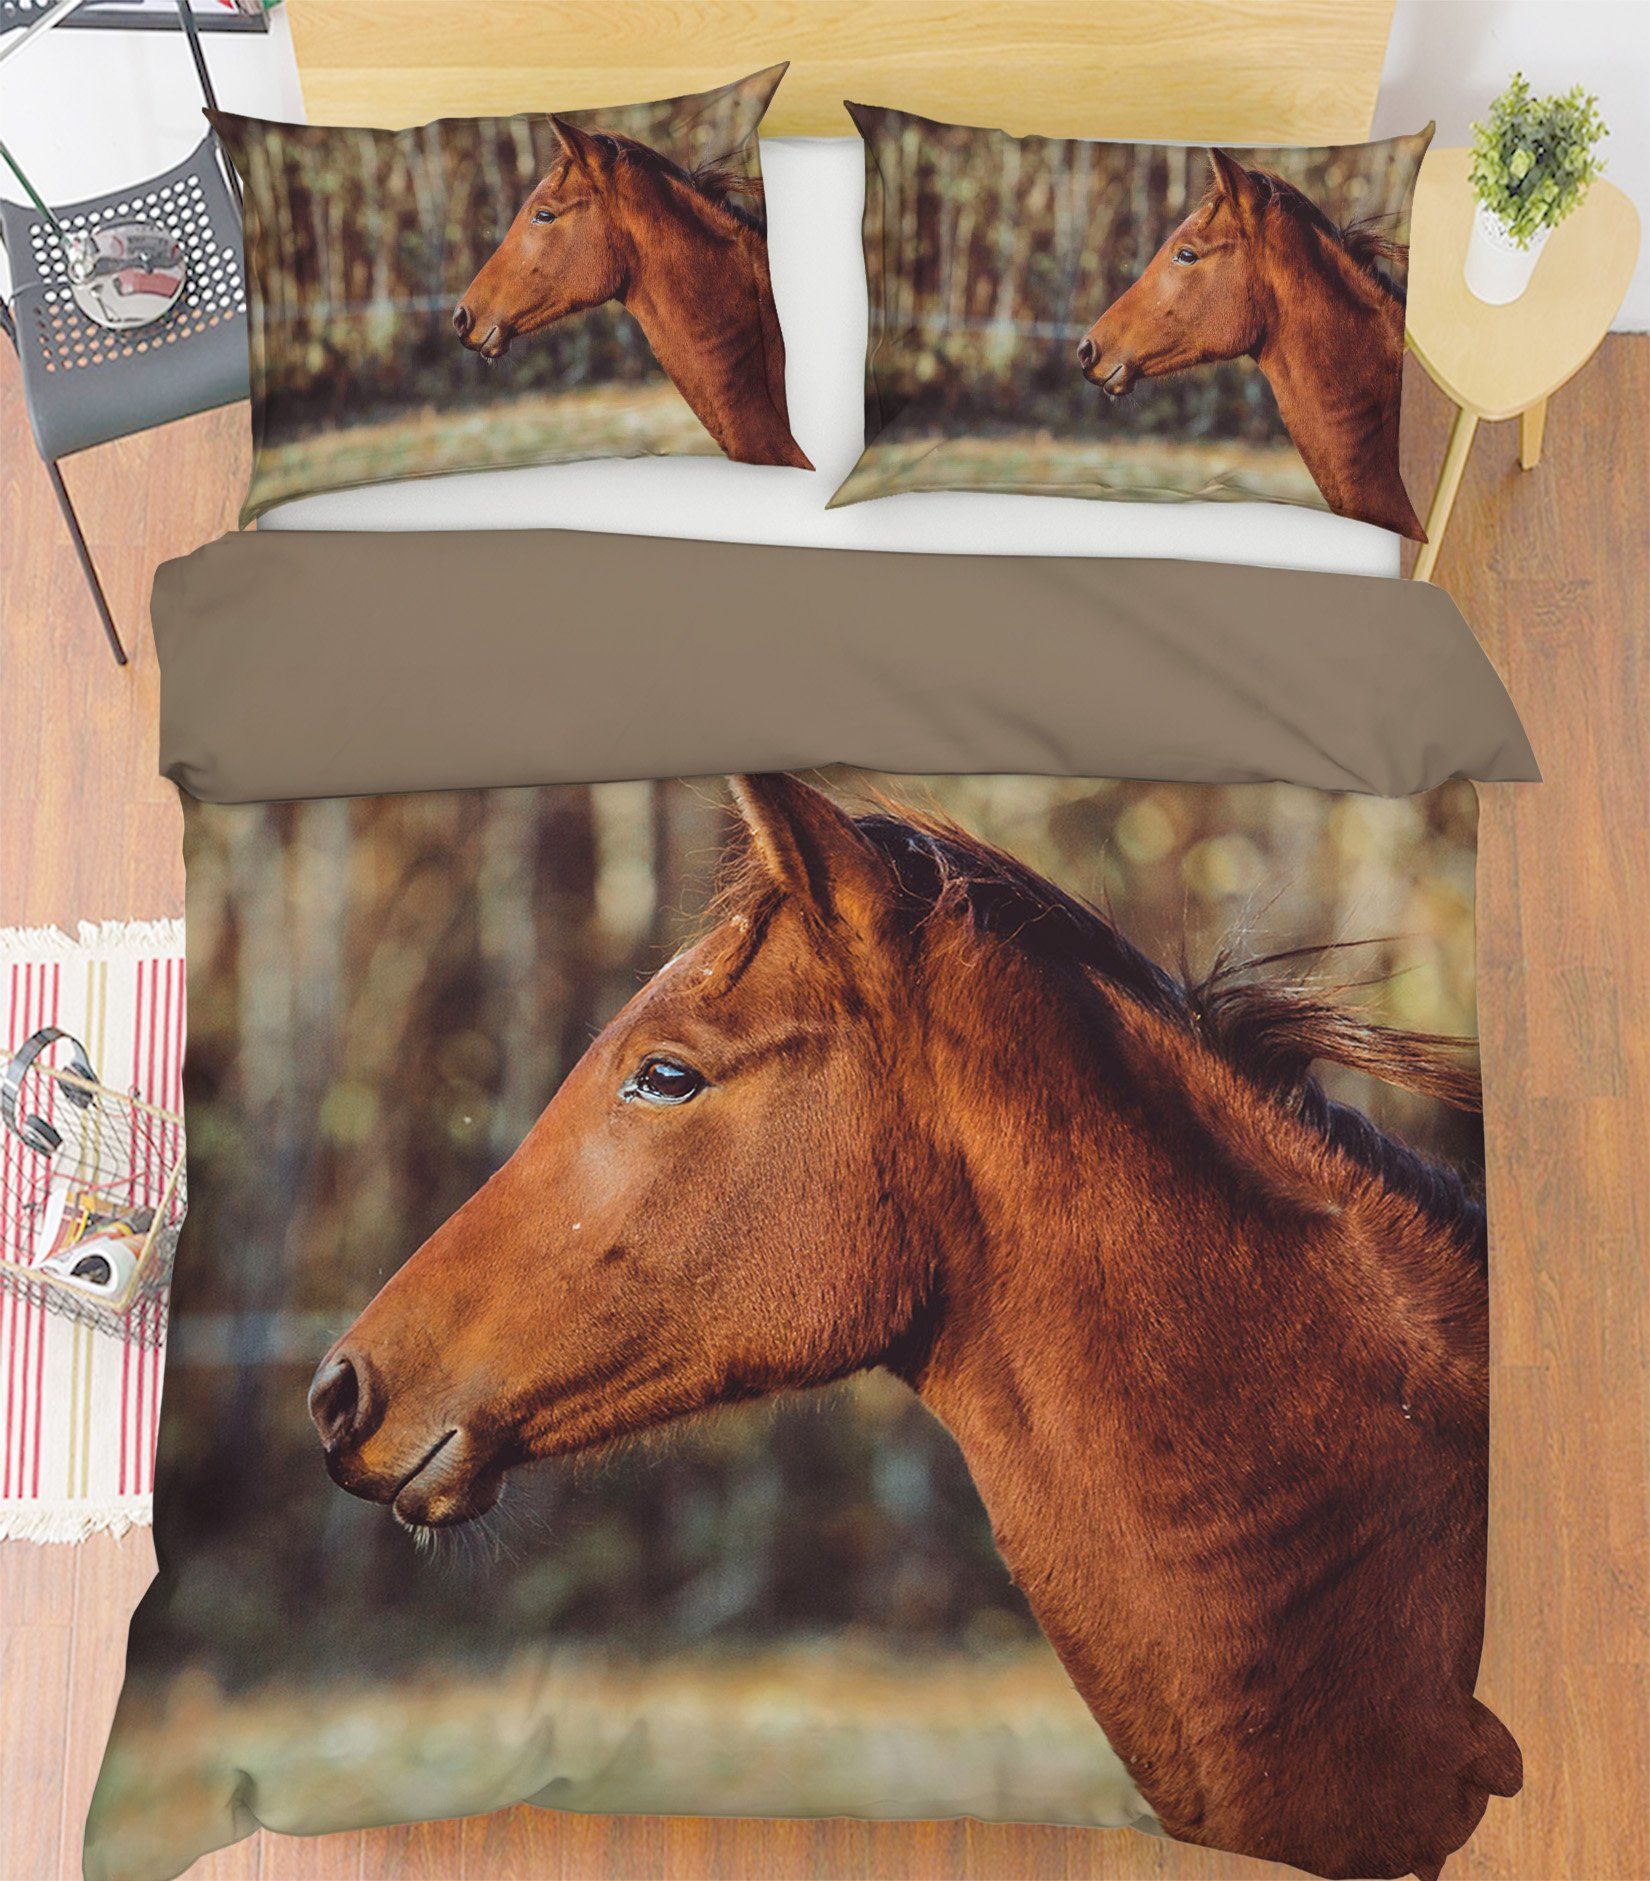 3D Forest Horse 1907 Bed Pillowcases Quilt Quiet Covers AJ Creativity Home 